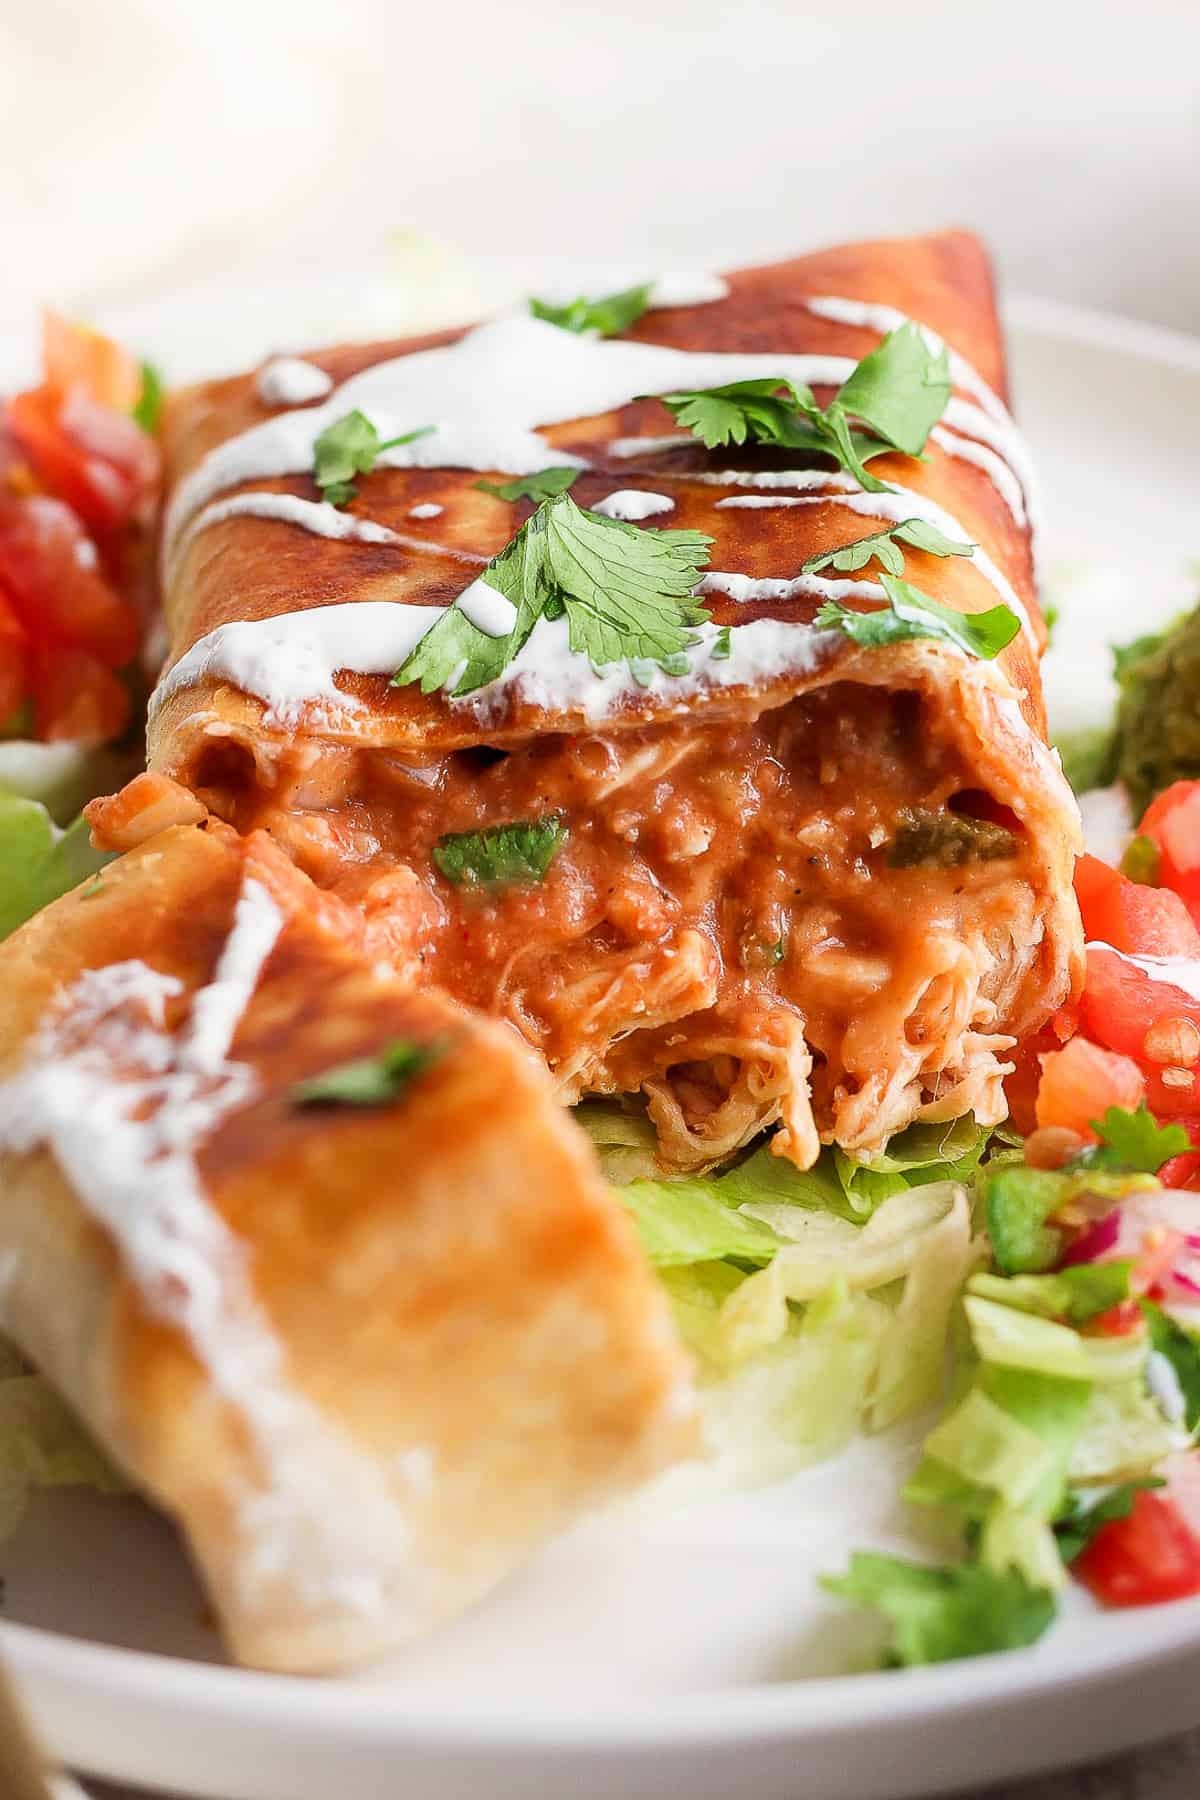 A chimichanga filled with shredded chicken, refried beans, salsa, and cheese sliced in half to see the inside.